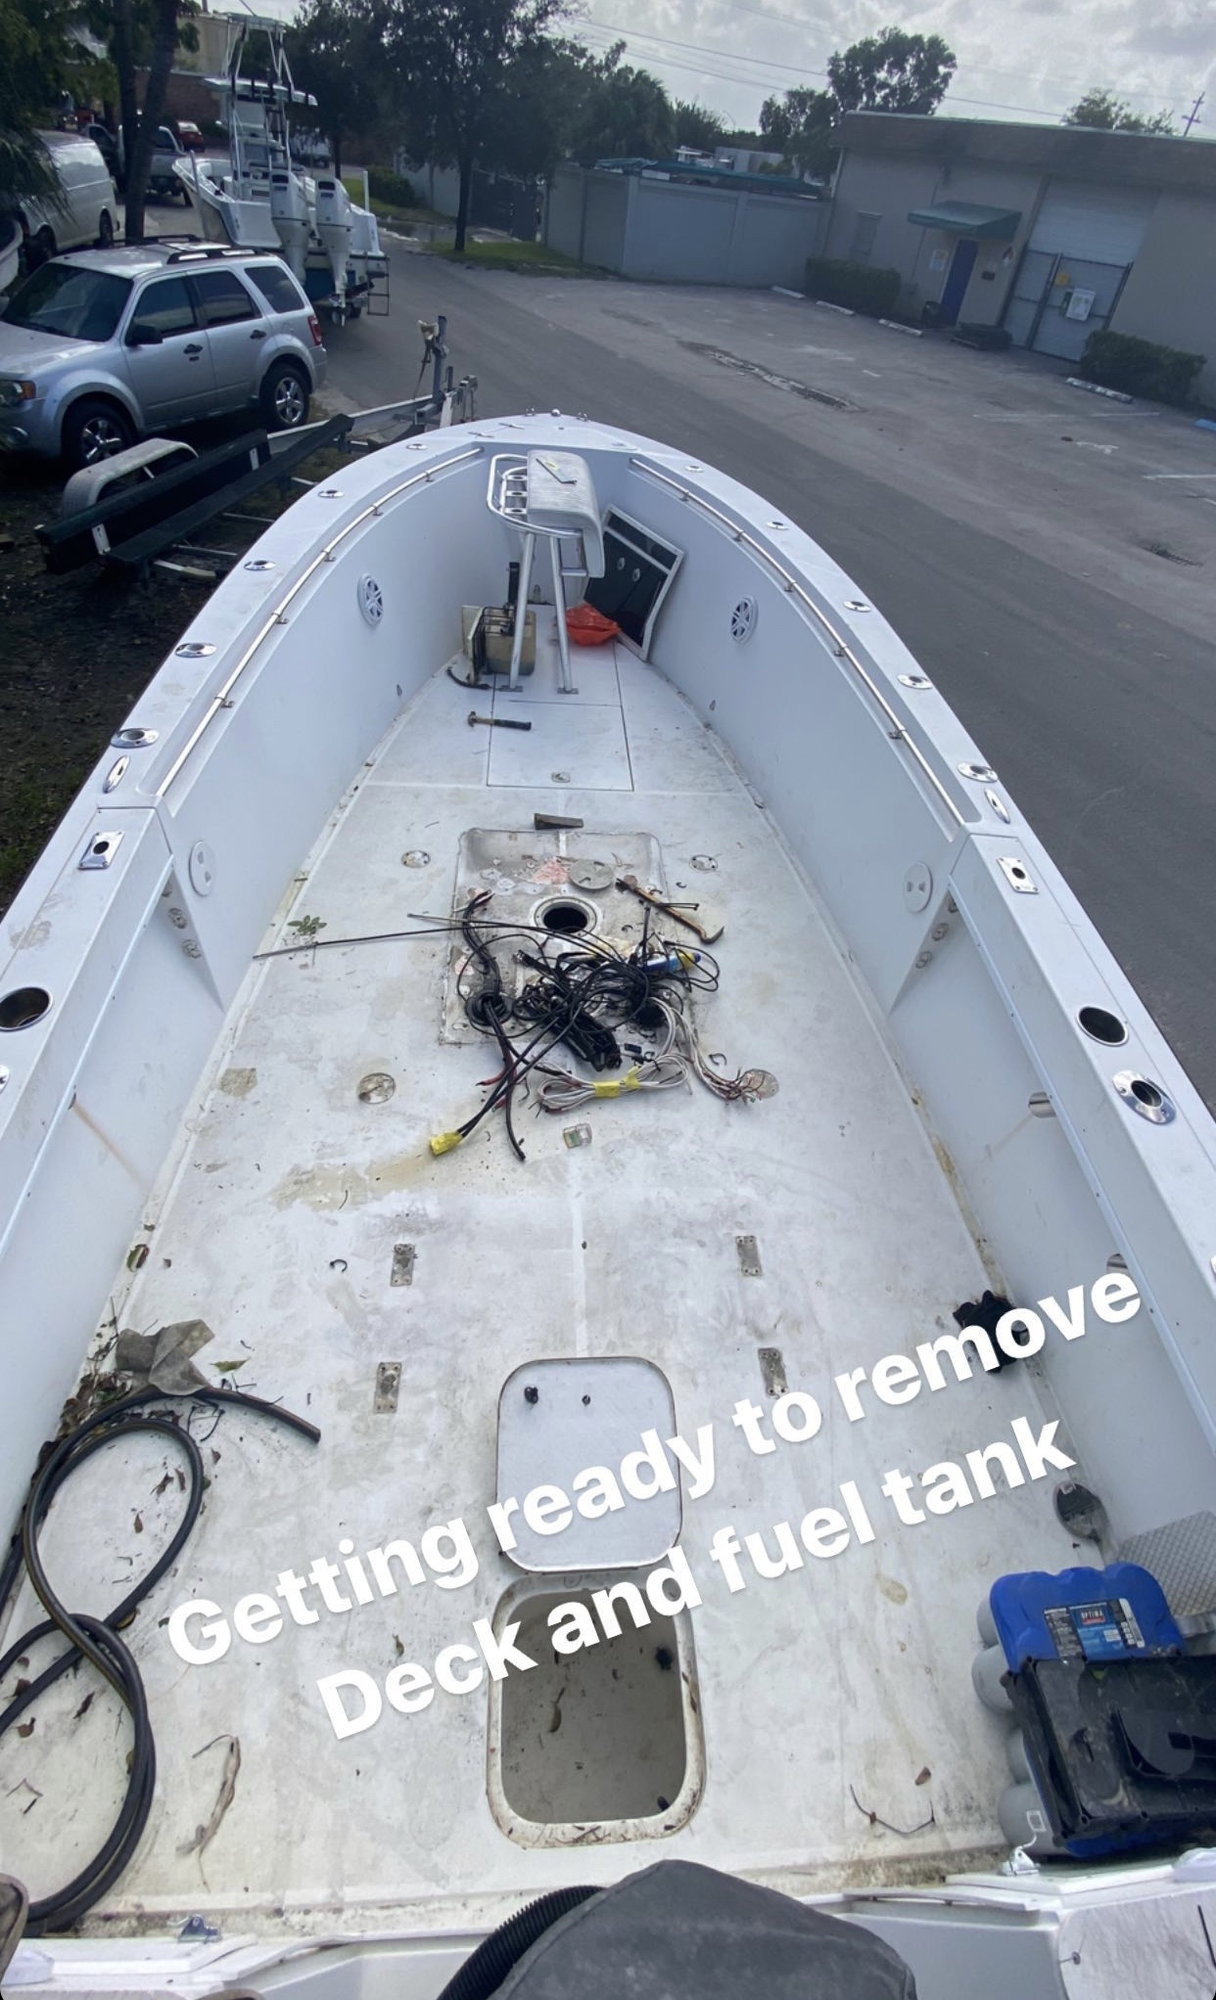 21 contender rebuild - The Hull Truth - Boating and Fishing Forum